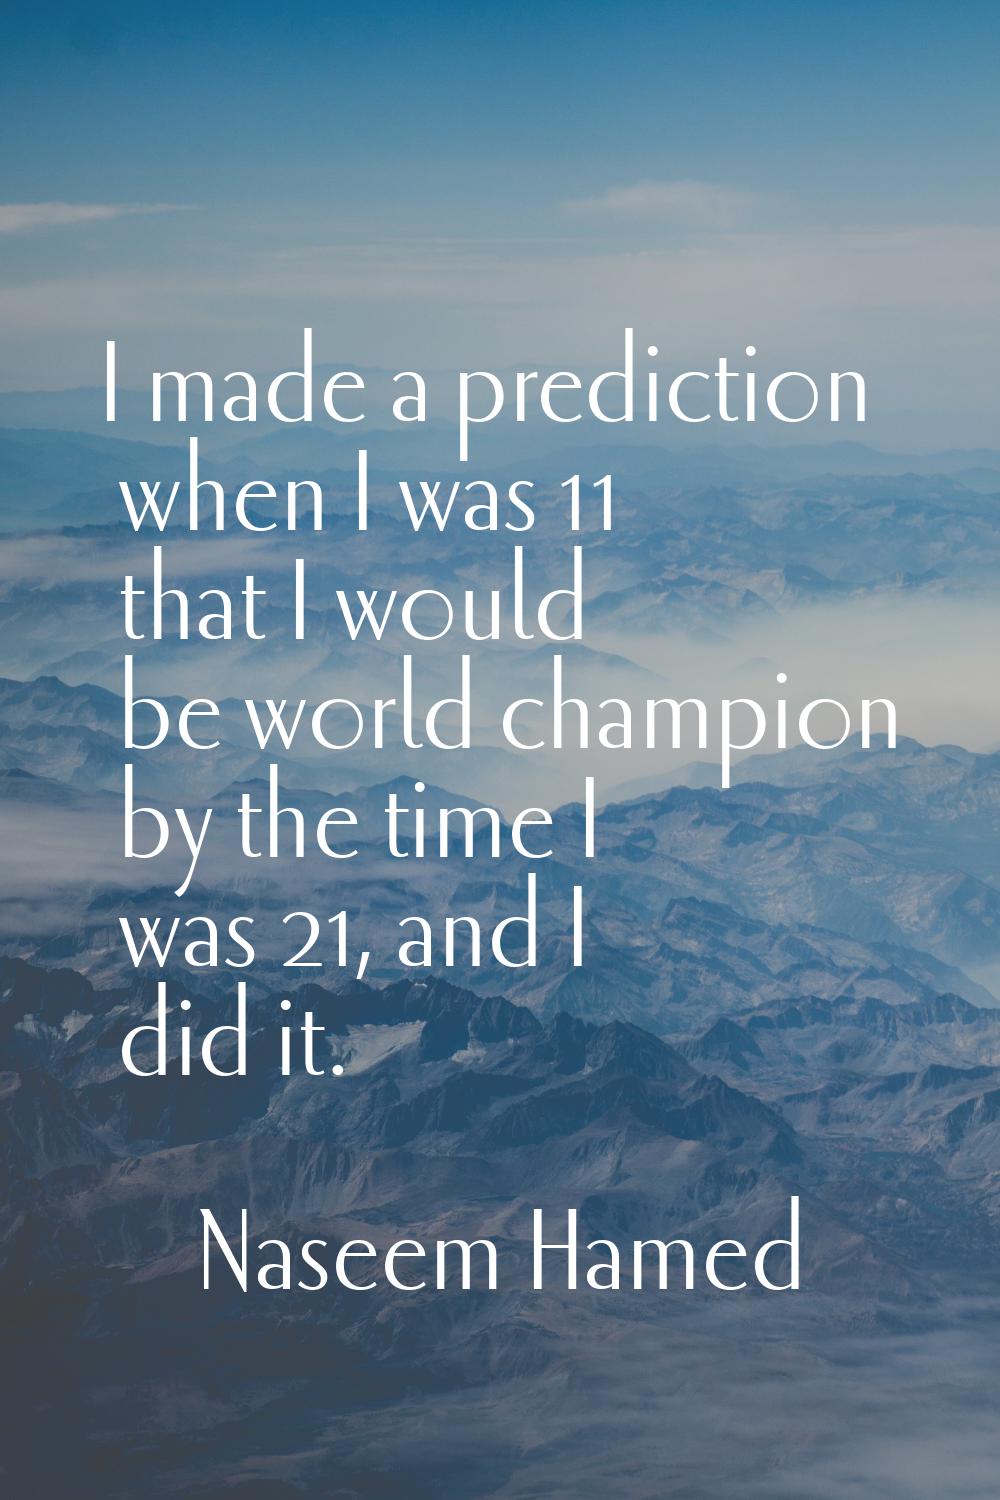 I made a prediction when I was 11 that I would be world champion by the time I was 21, and I did it